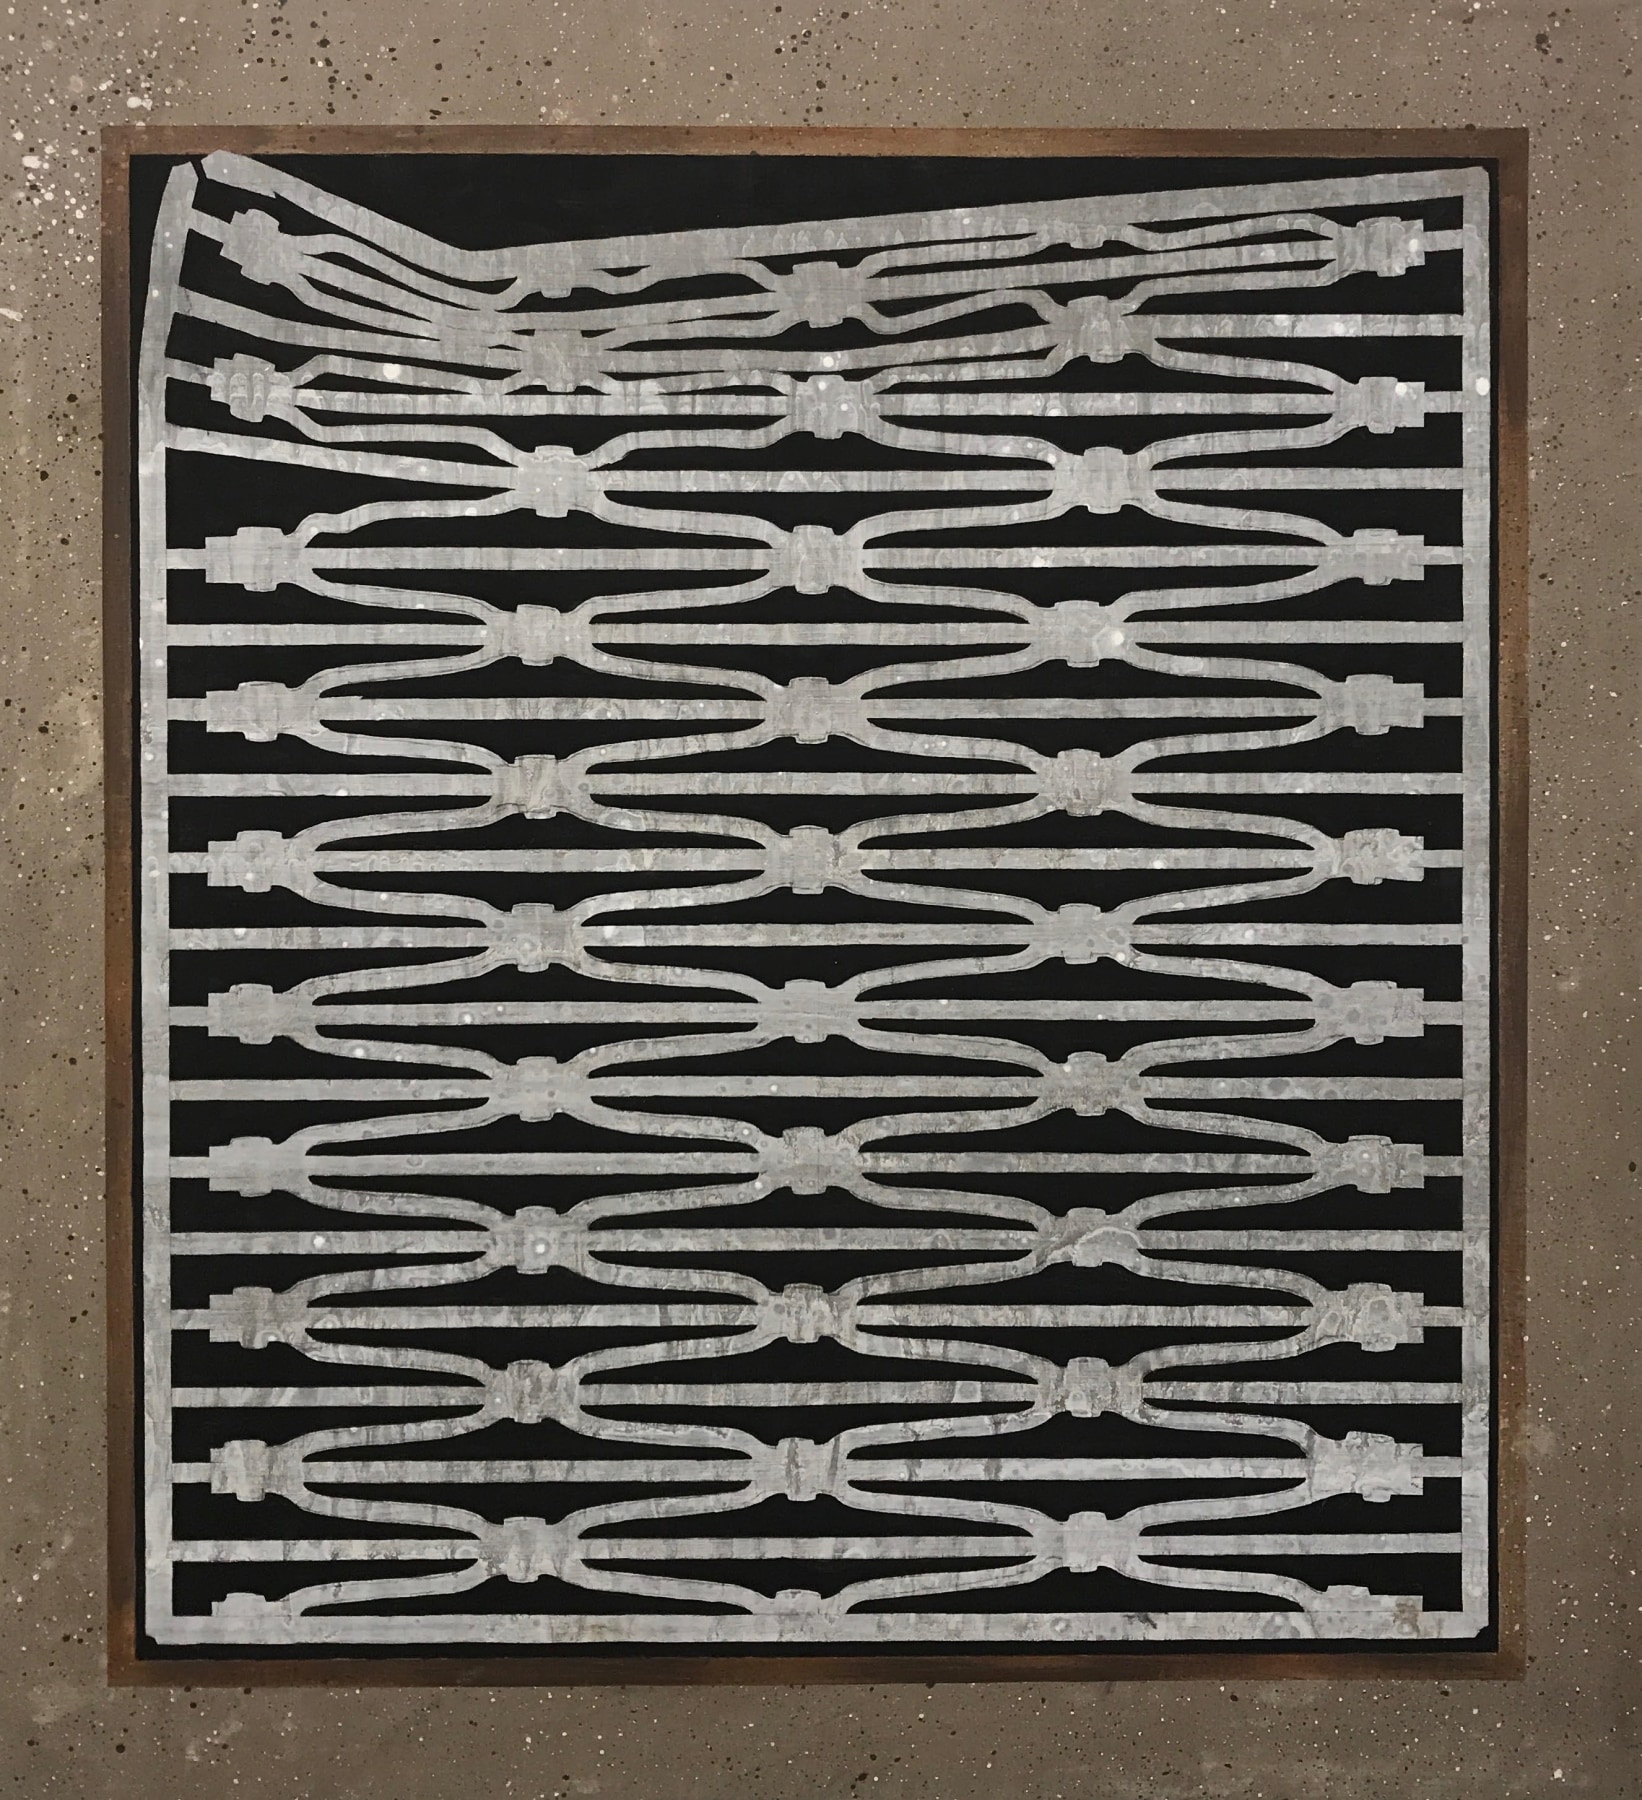 Hannah Cole  Grate In Brown Cement, 2015  Acrylic on canvas  22h x 24w in 55.88h x 60.96w cm  HC_017 Photorealistic painting